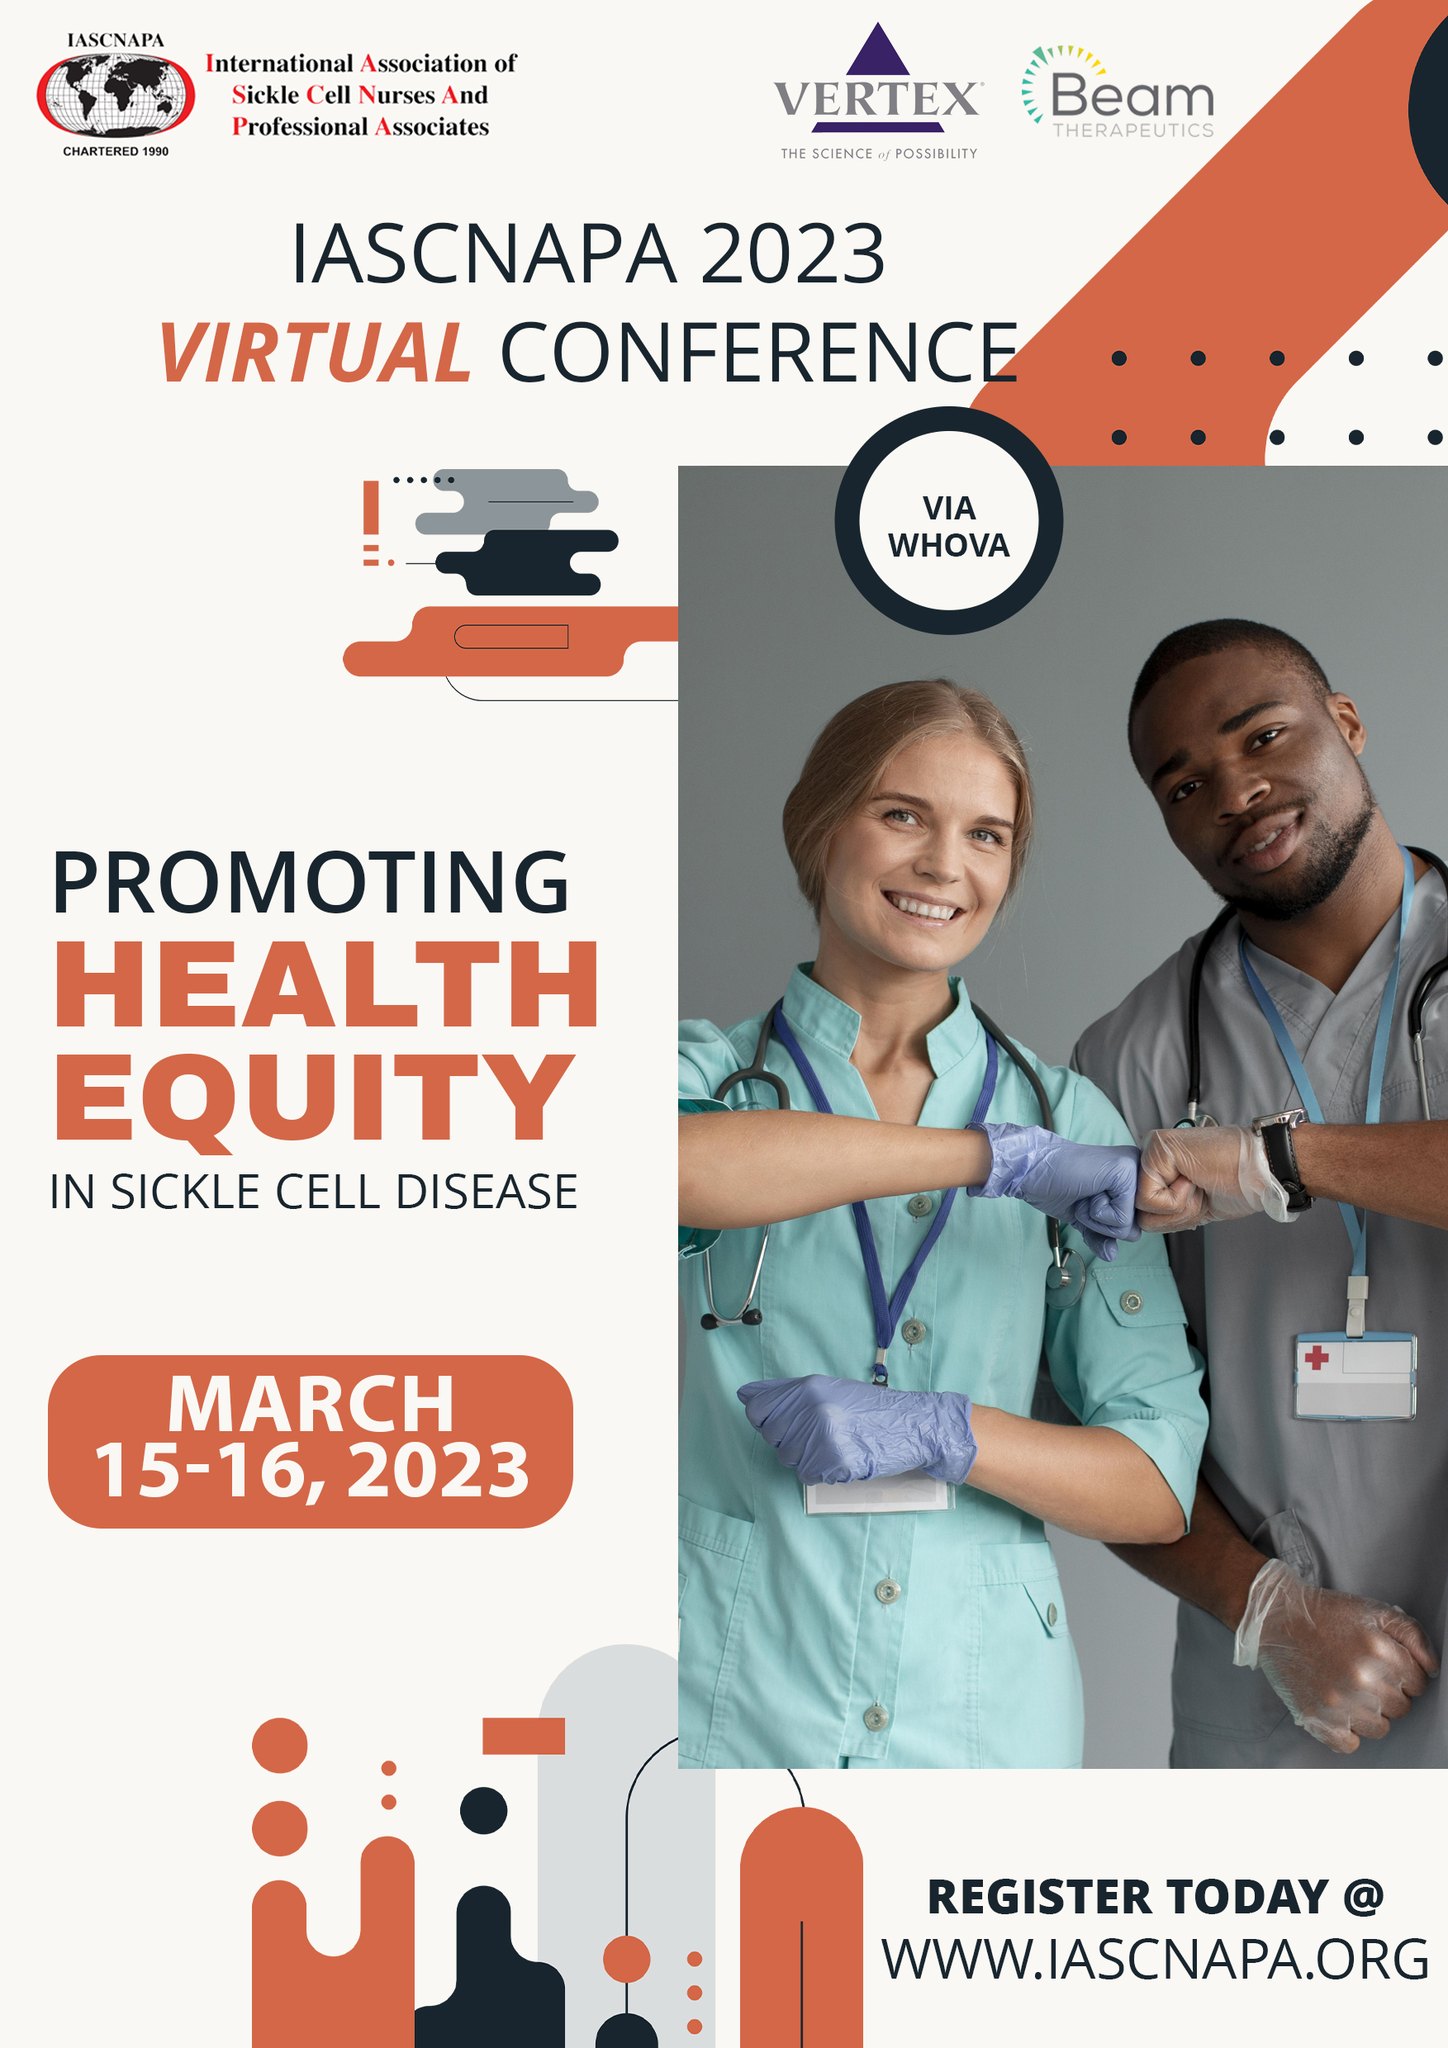 IASCNAPA 2023 Virtual Conference: Promoting Health Equity In Sickle Cell Disease 